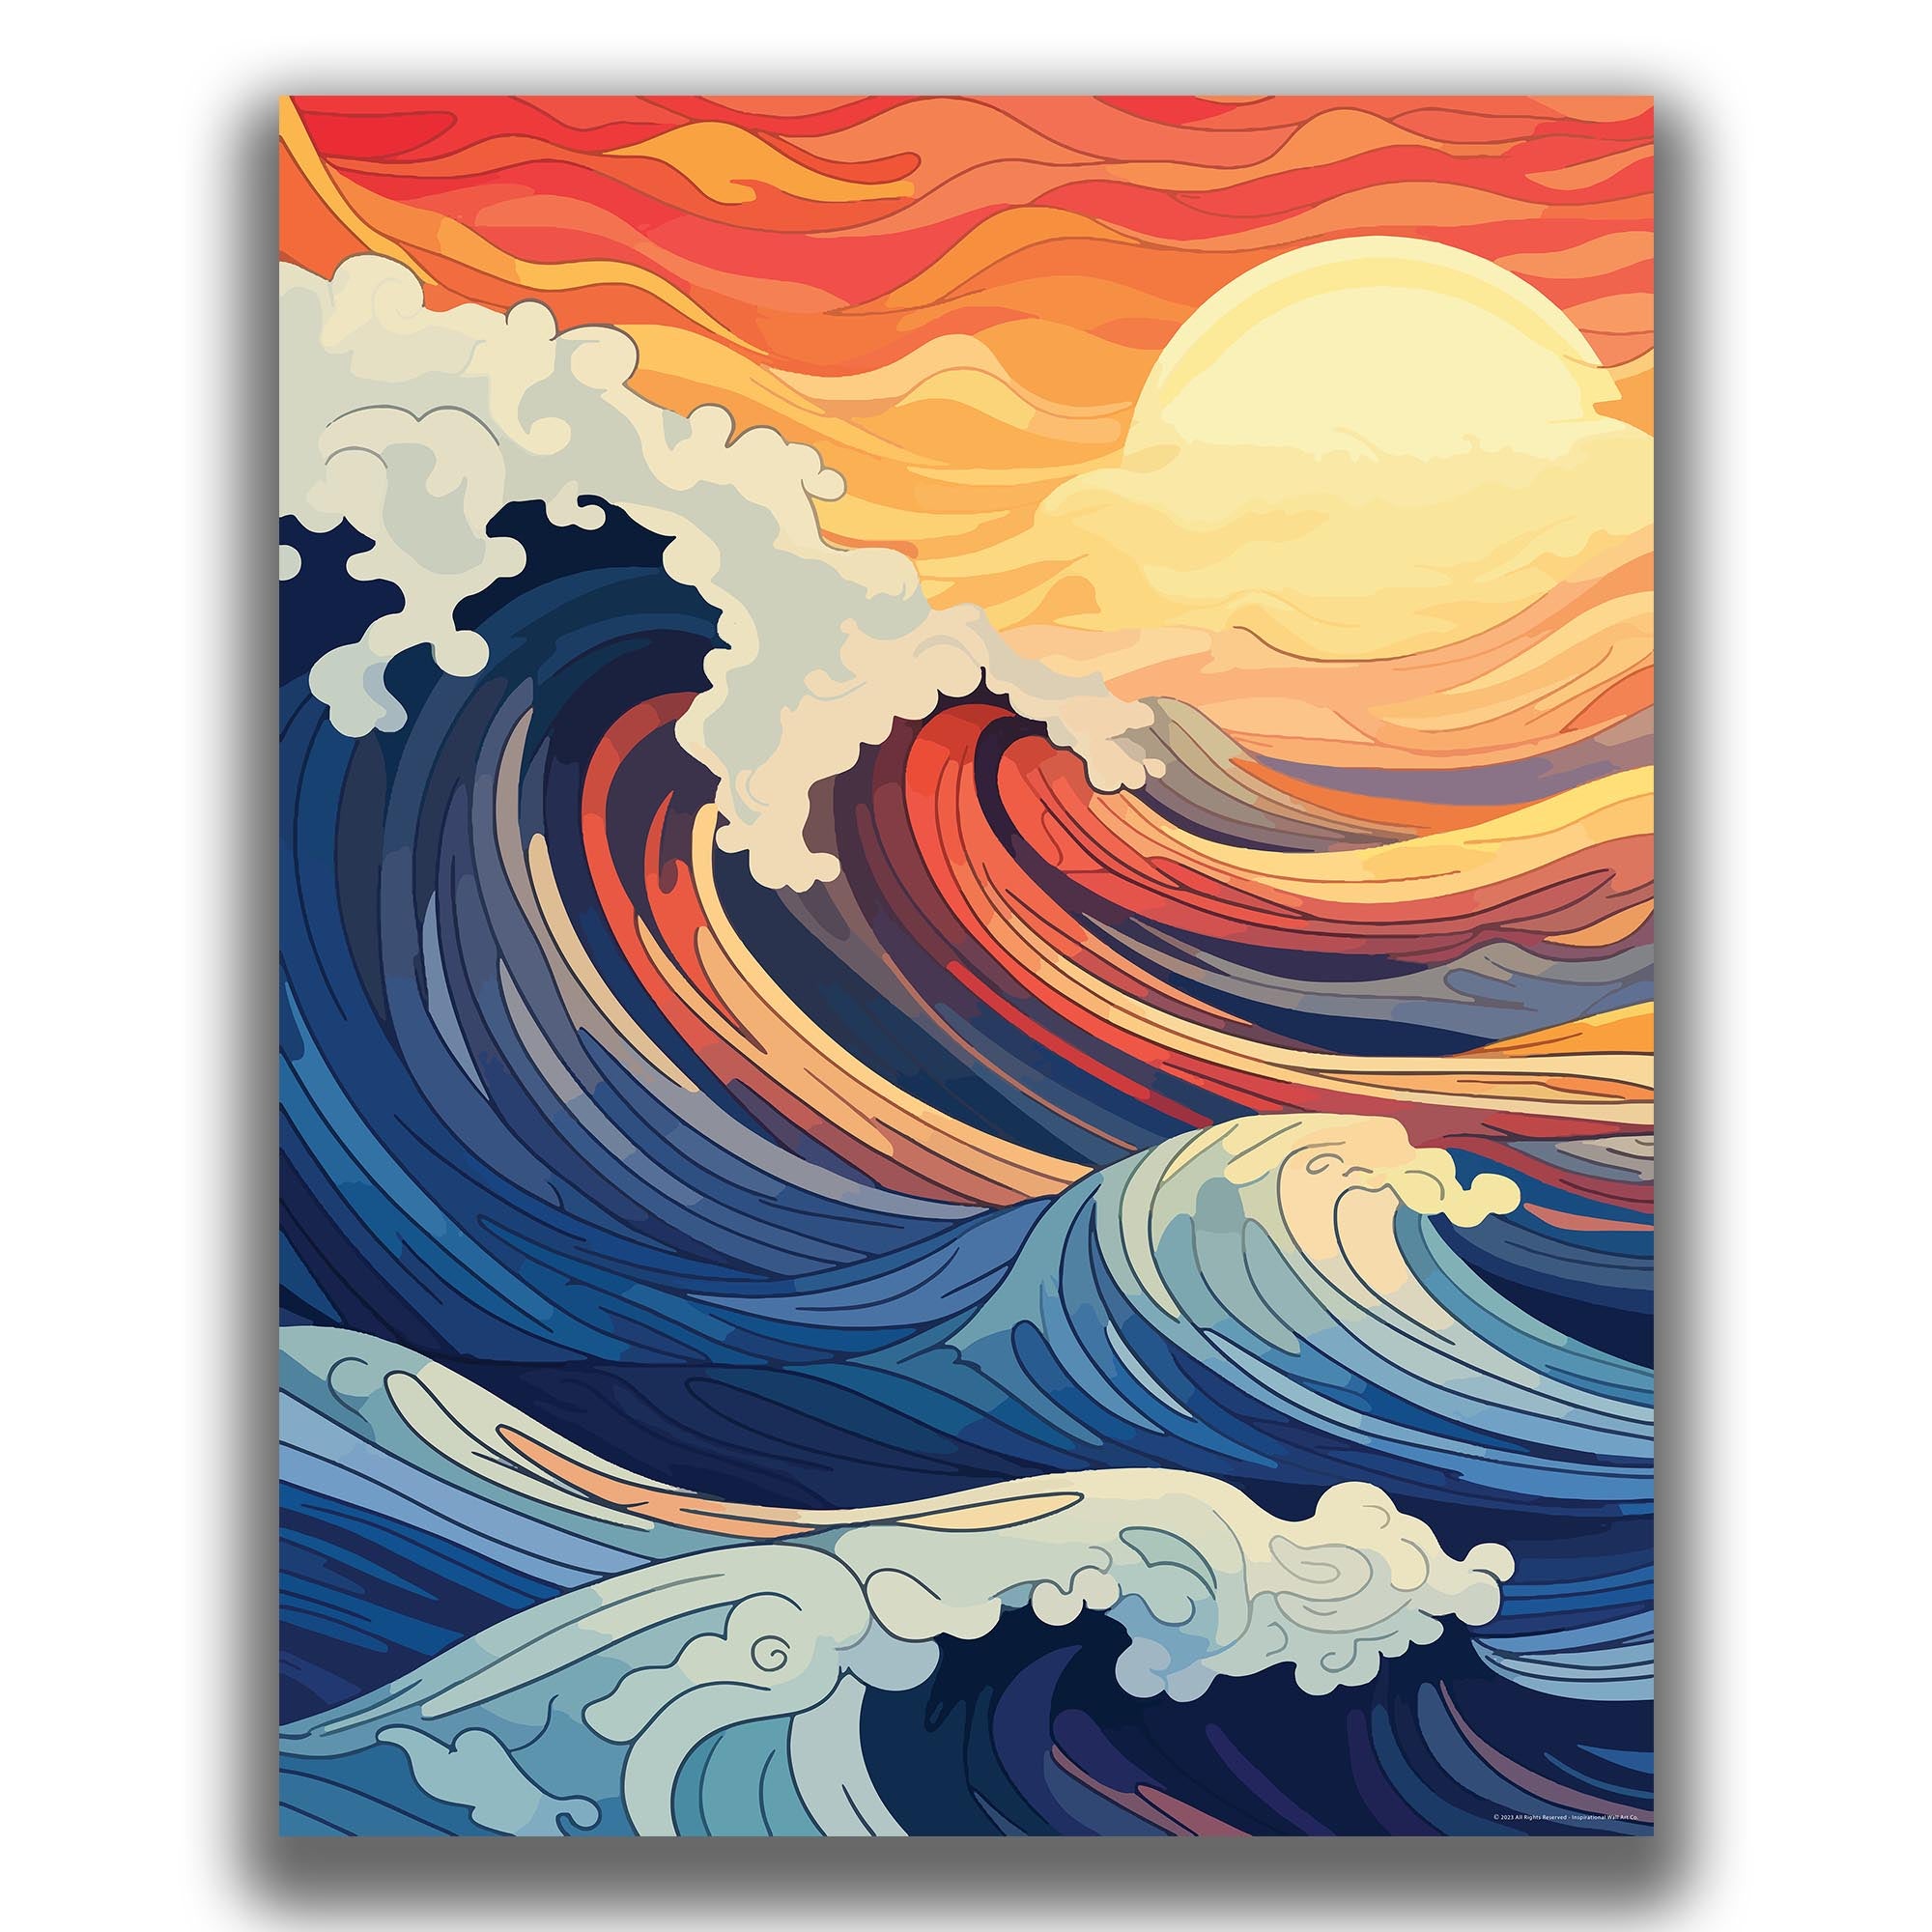 Tides - Surfing Poster